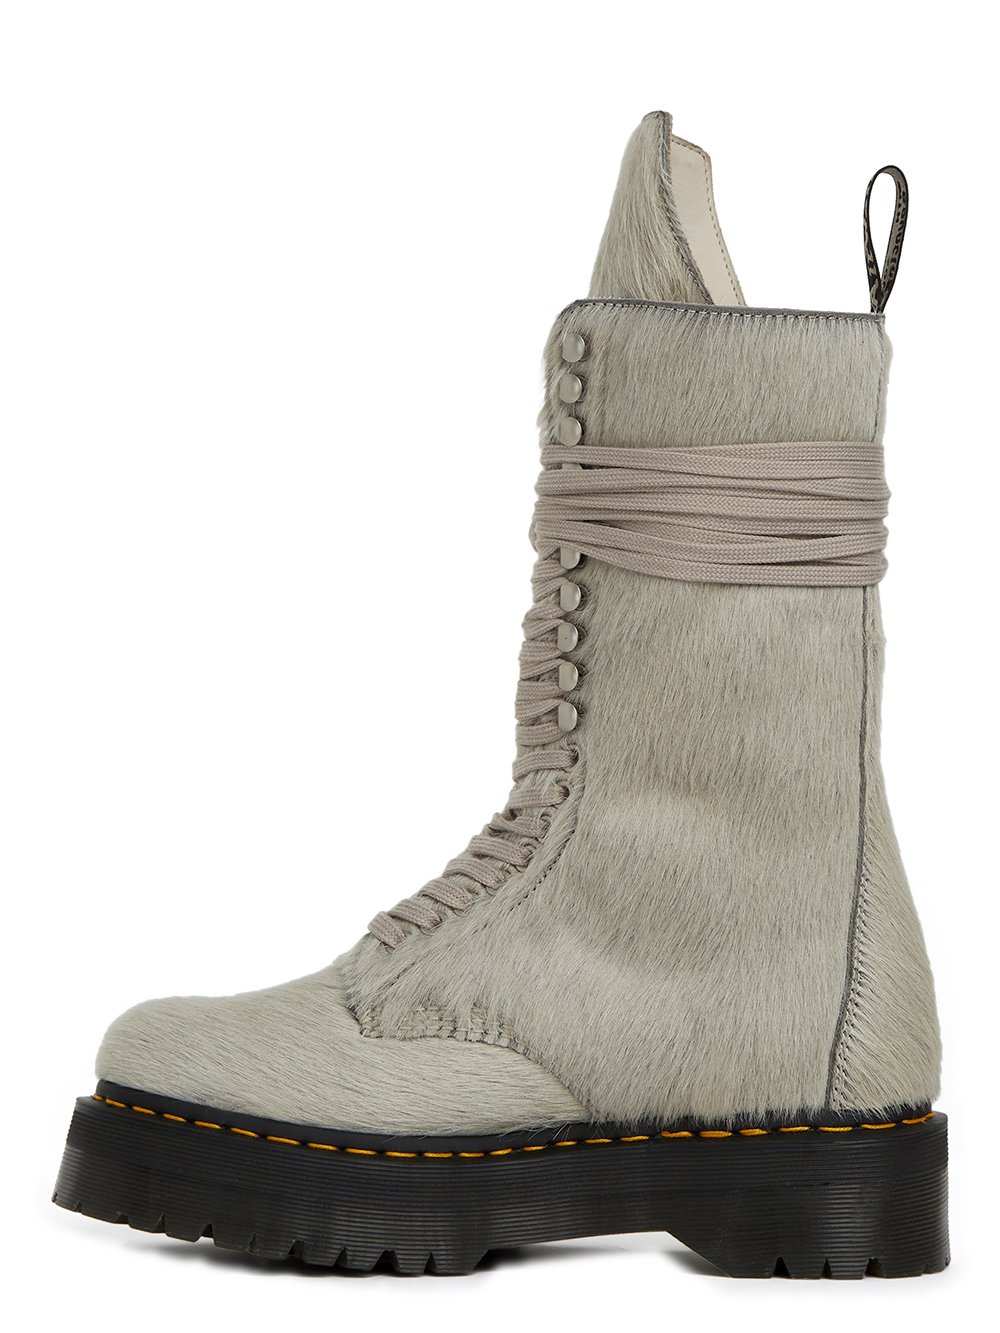 DR. MARTENS x RICK OWENS FW22 STROBE CALF LENGTH BOOT IN PEARL HAIR-ON COW LEATHER.  